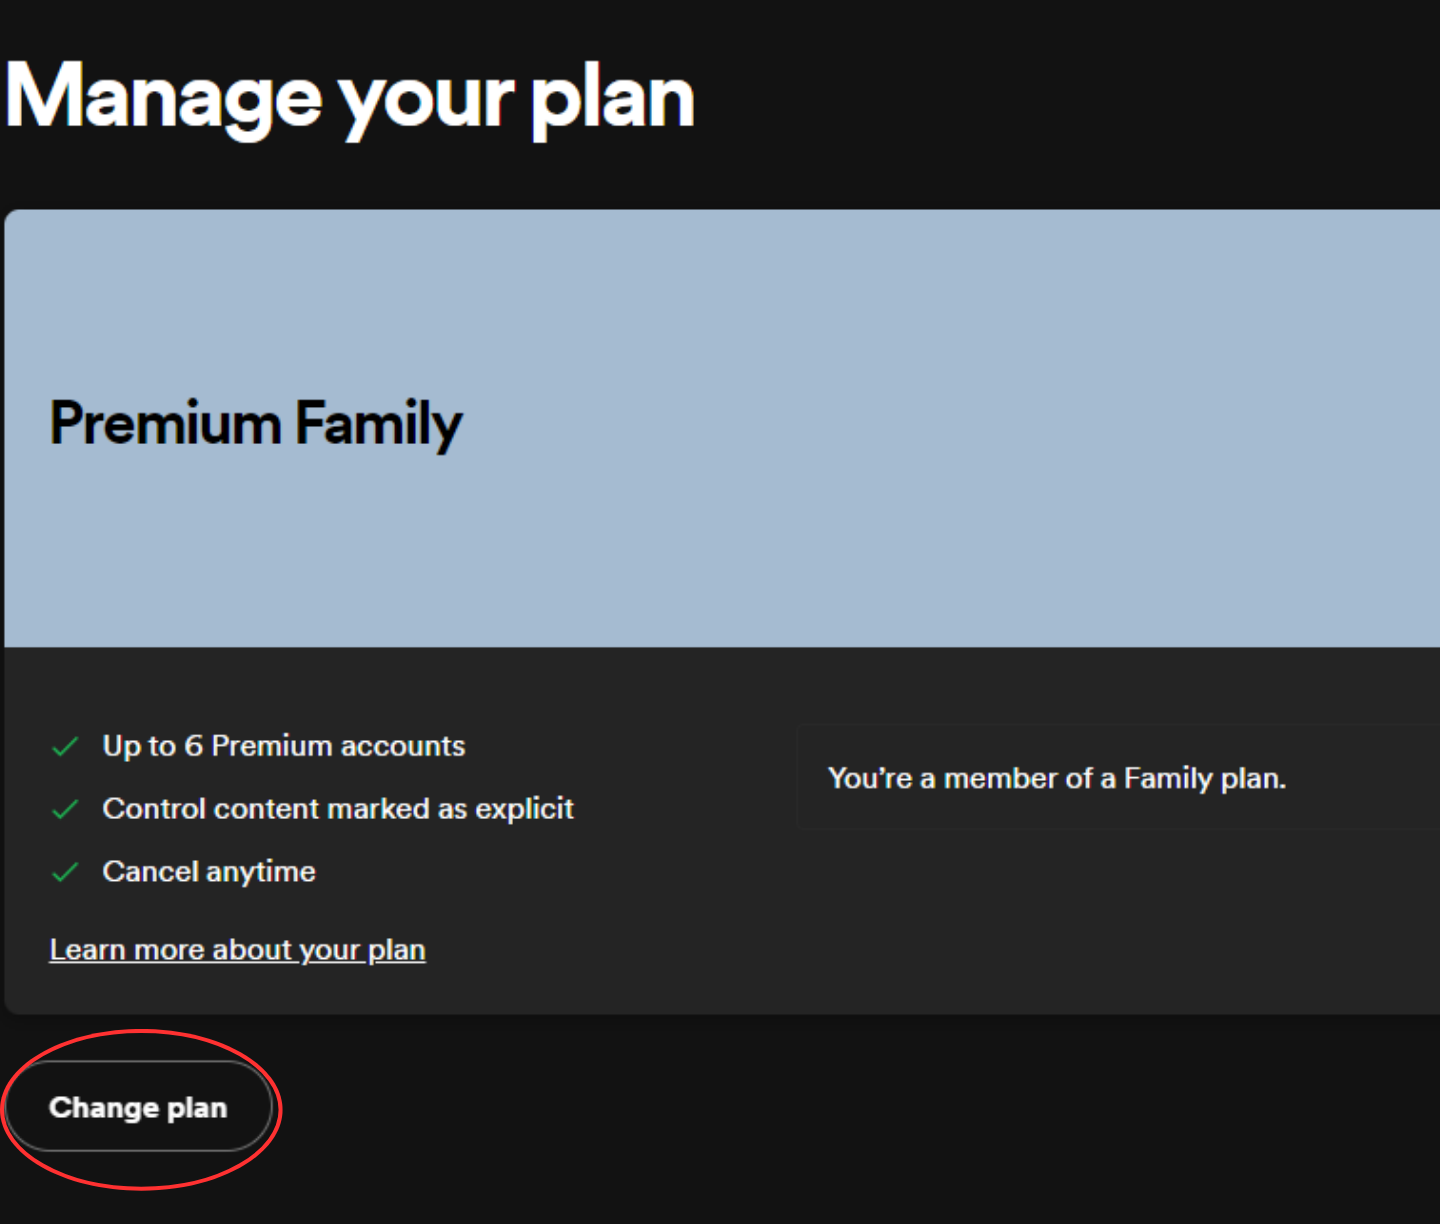 Under the current subscription plan, click on "Change plan".